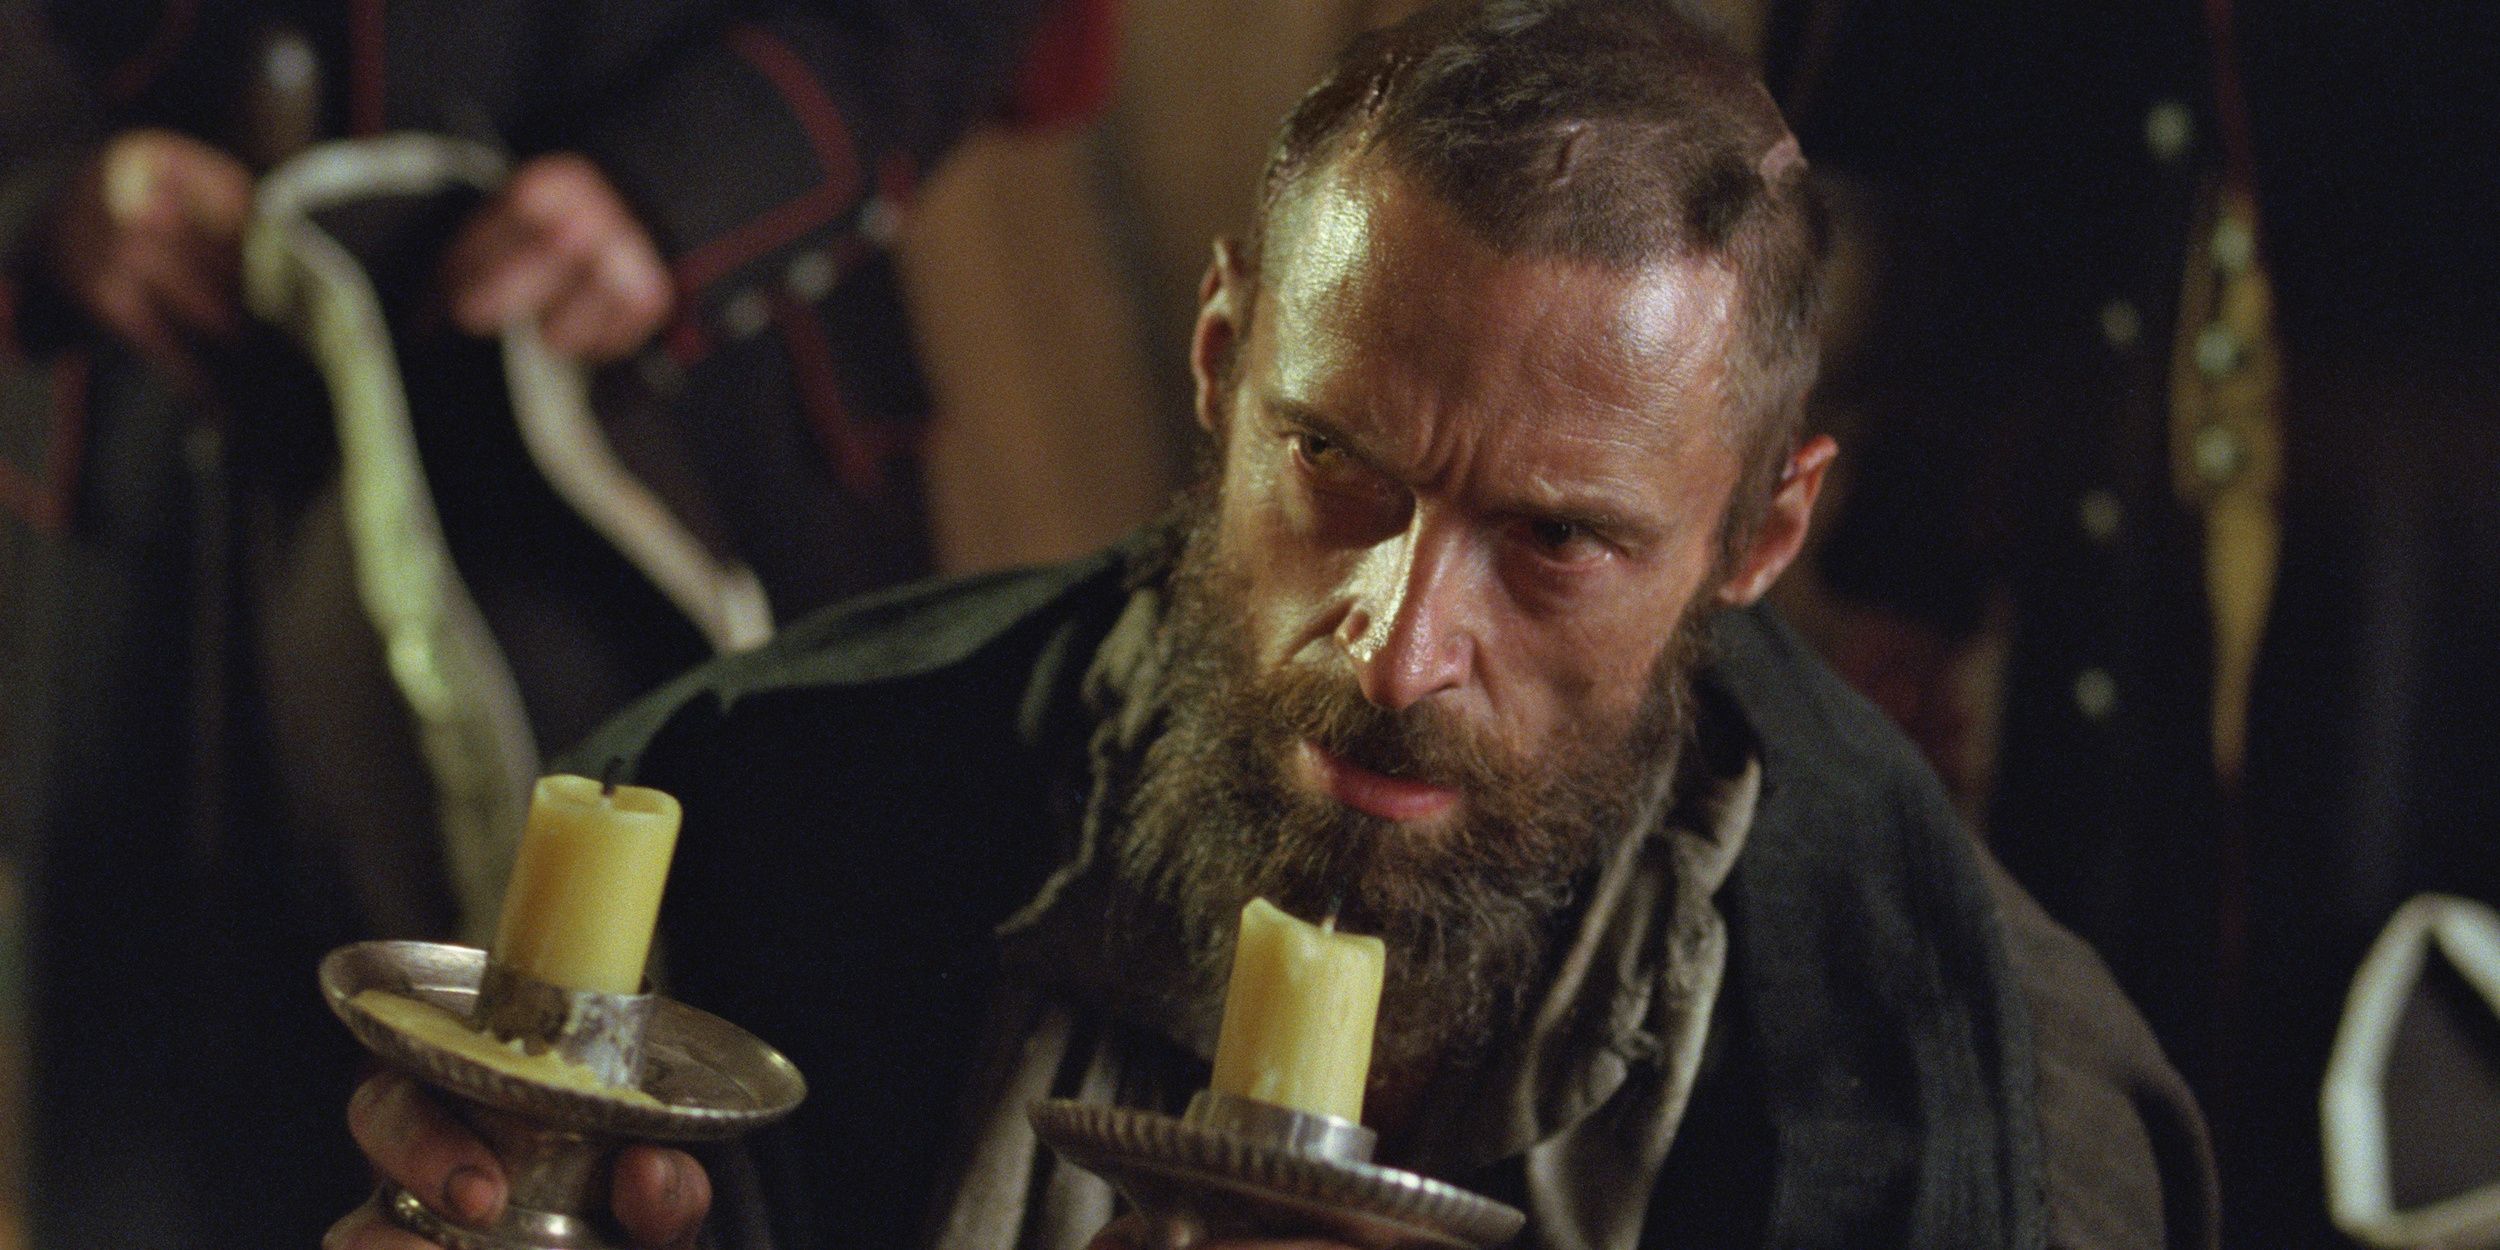 Hugh Jackman in Les Misérables looking scruffy with shaved head and beard holding two candles 